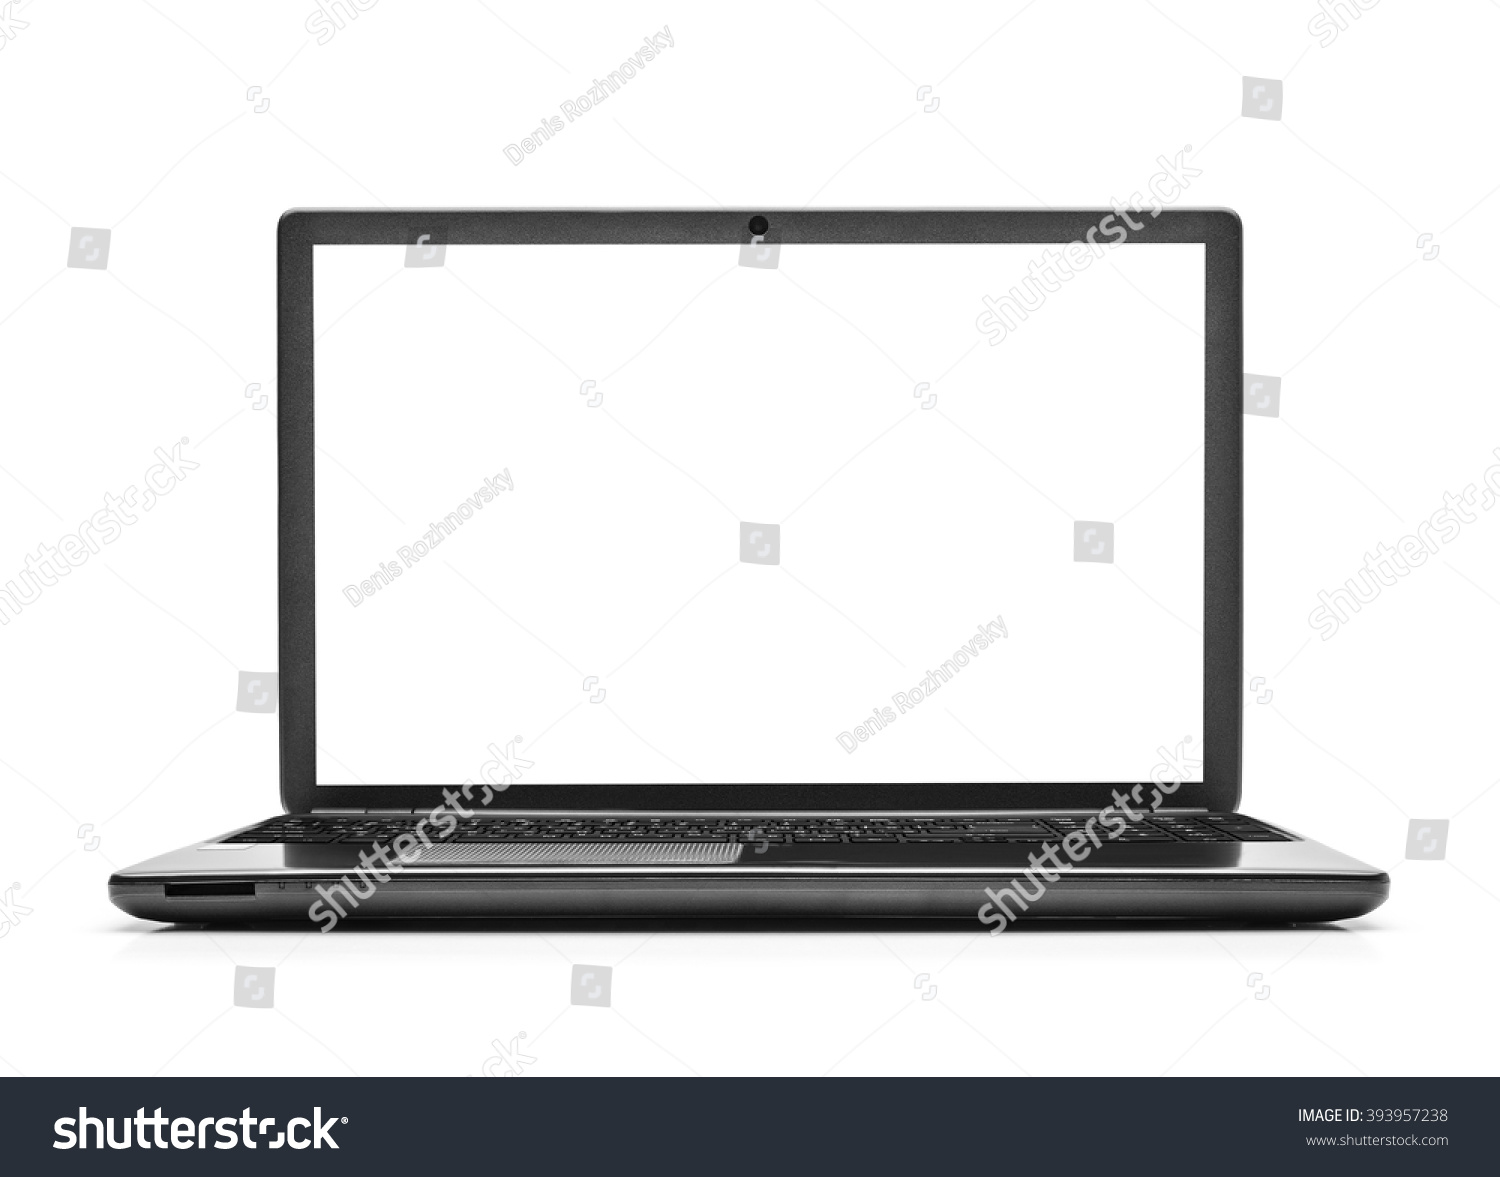 Laptop isolated on white background with clipping path. #393957238